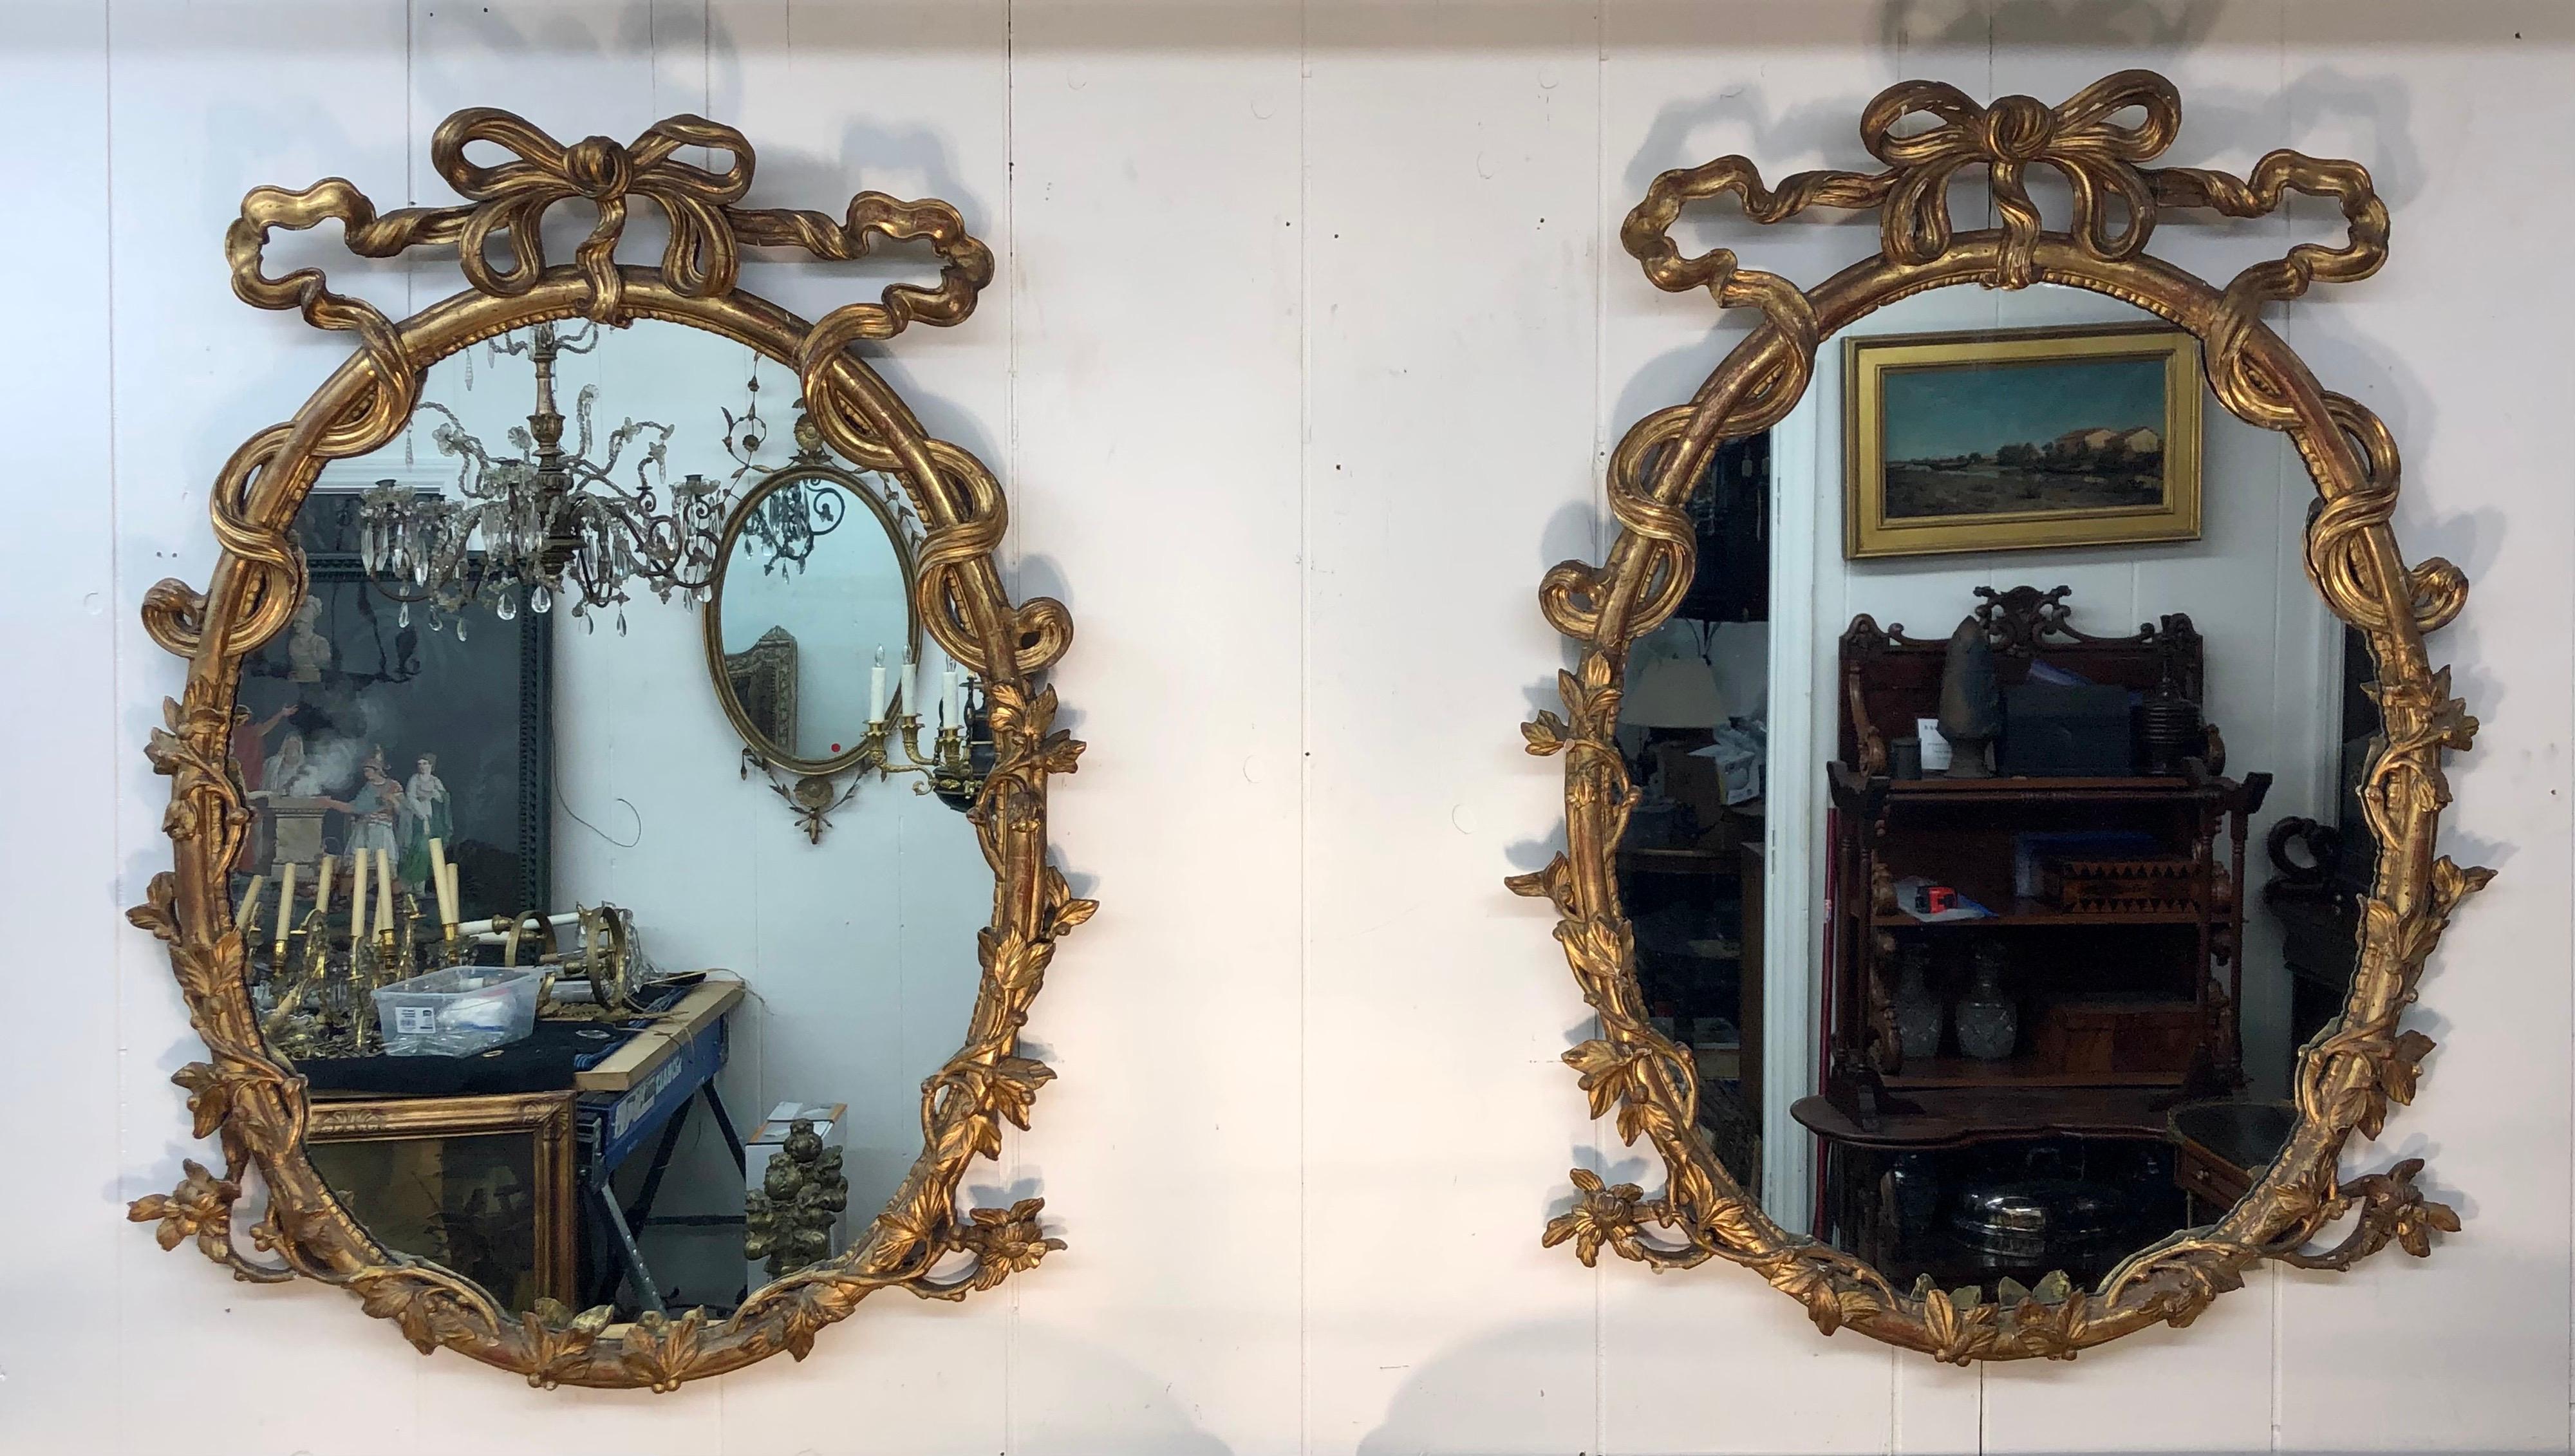 A pair of 18th C. George III period Chippendale oval carved giltwood rococo mirrors. The pierced Ribbon Cartouche is above the oval plates within elaborate rocaille frames with pierced ribbon and foliate vine carving. The elegant Rococo mirrors are